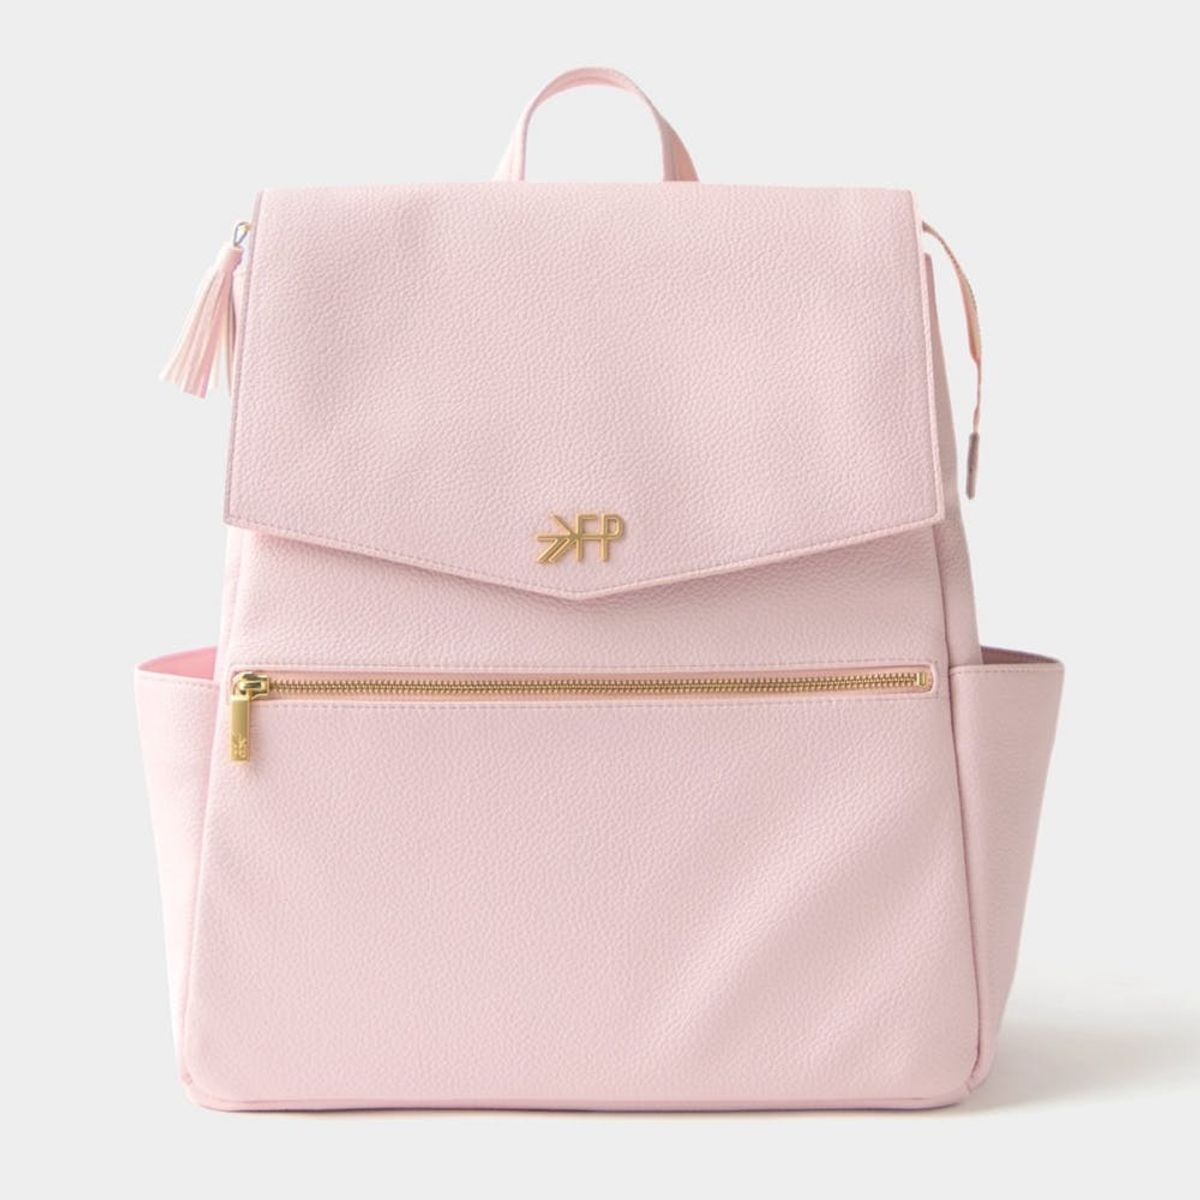 9 Stylish Diaper Bags to Sport This Spring